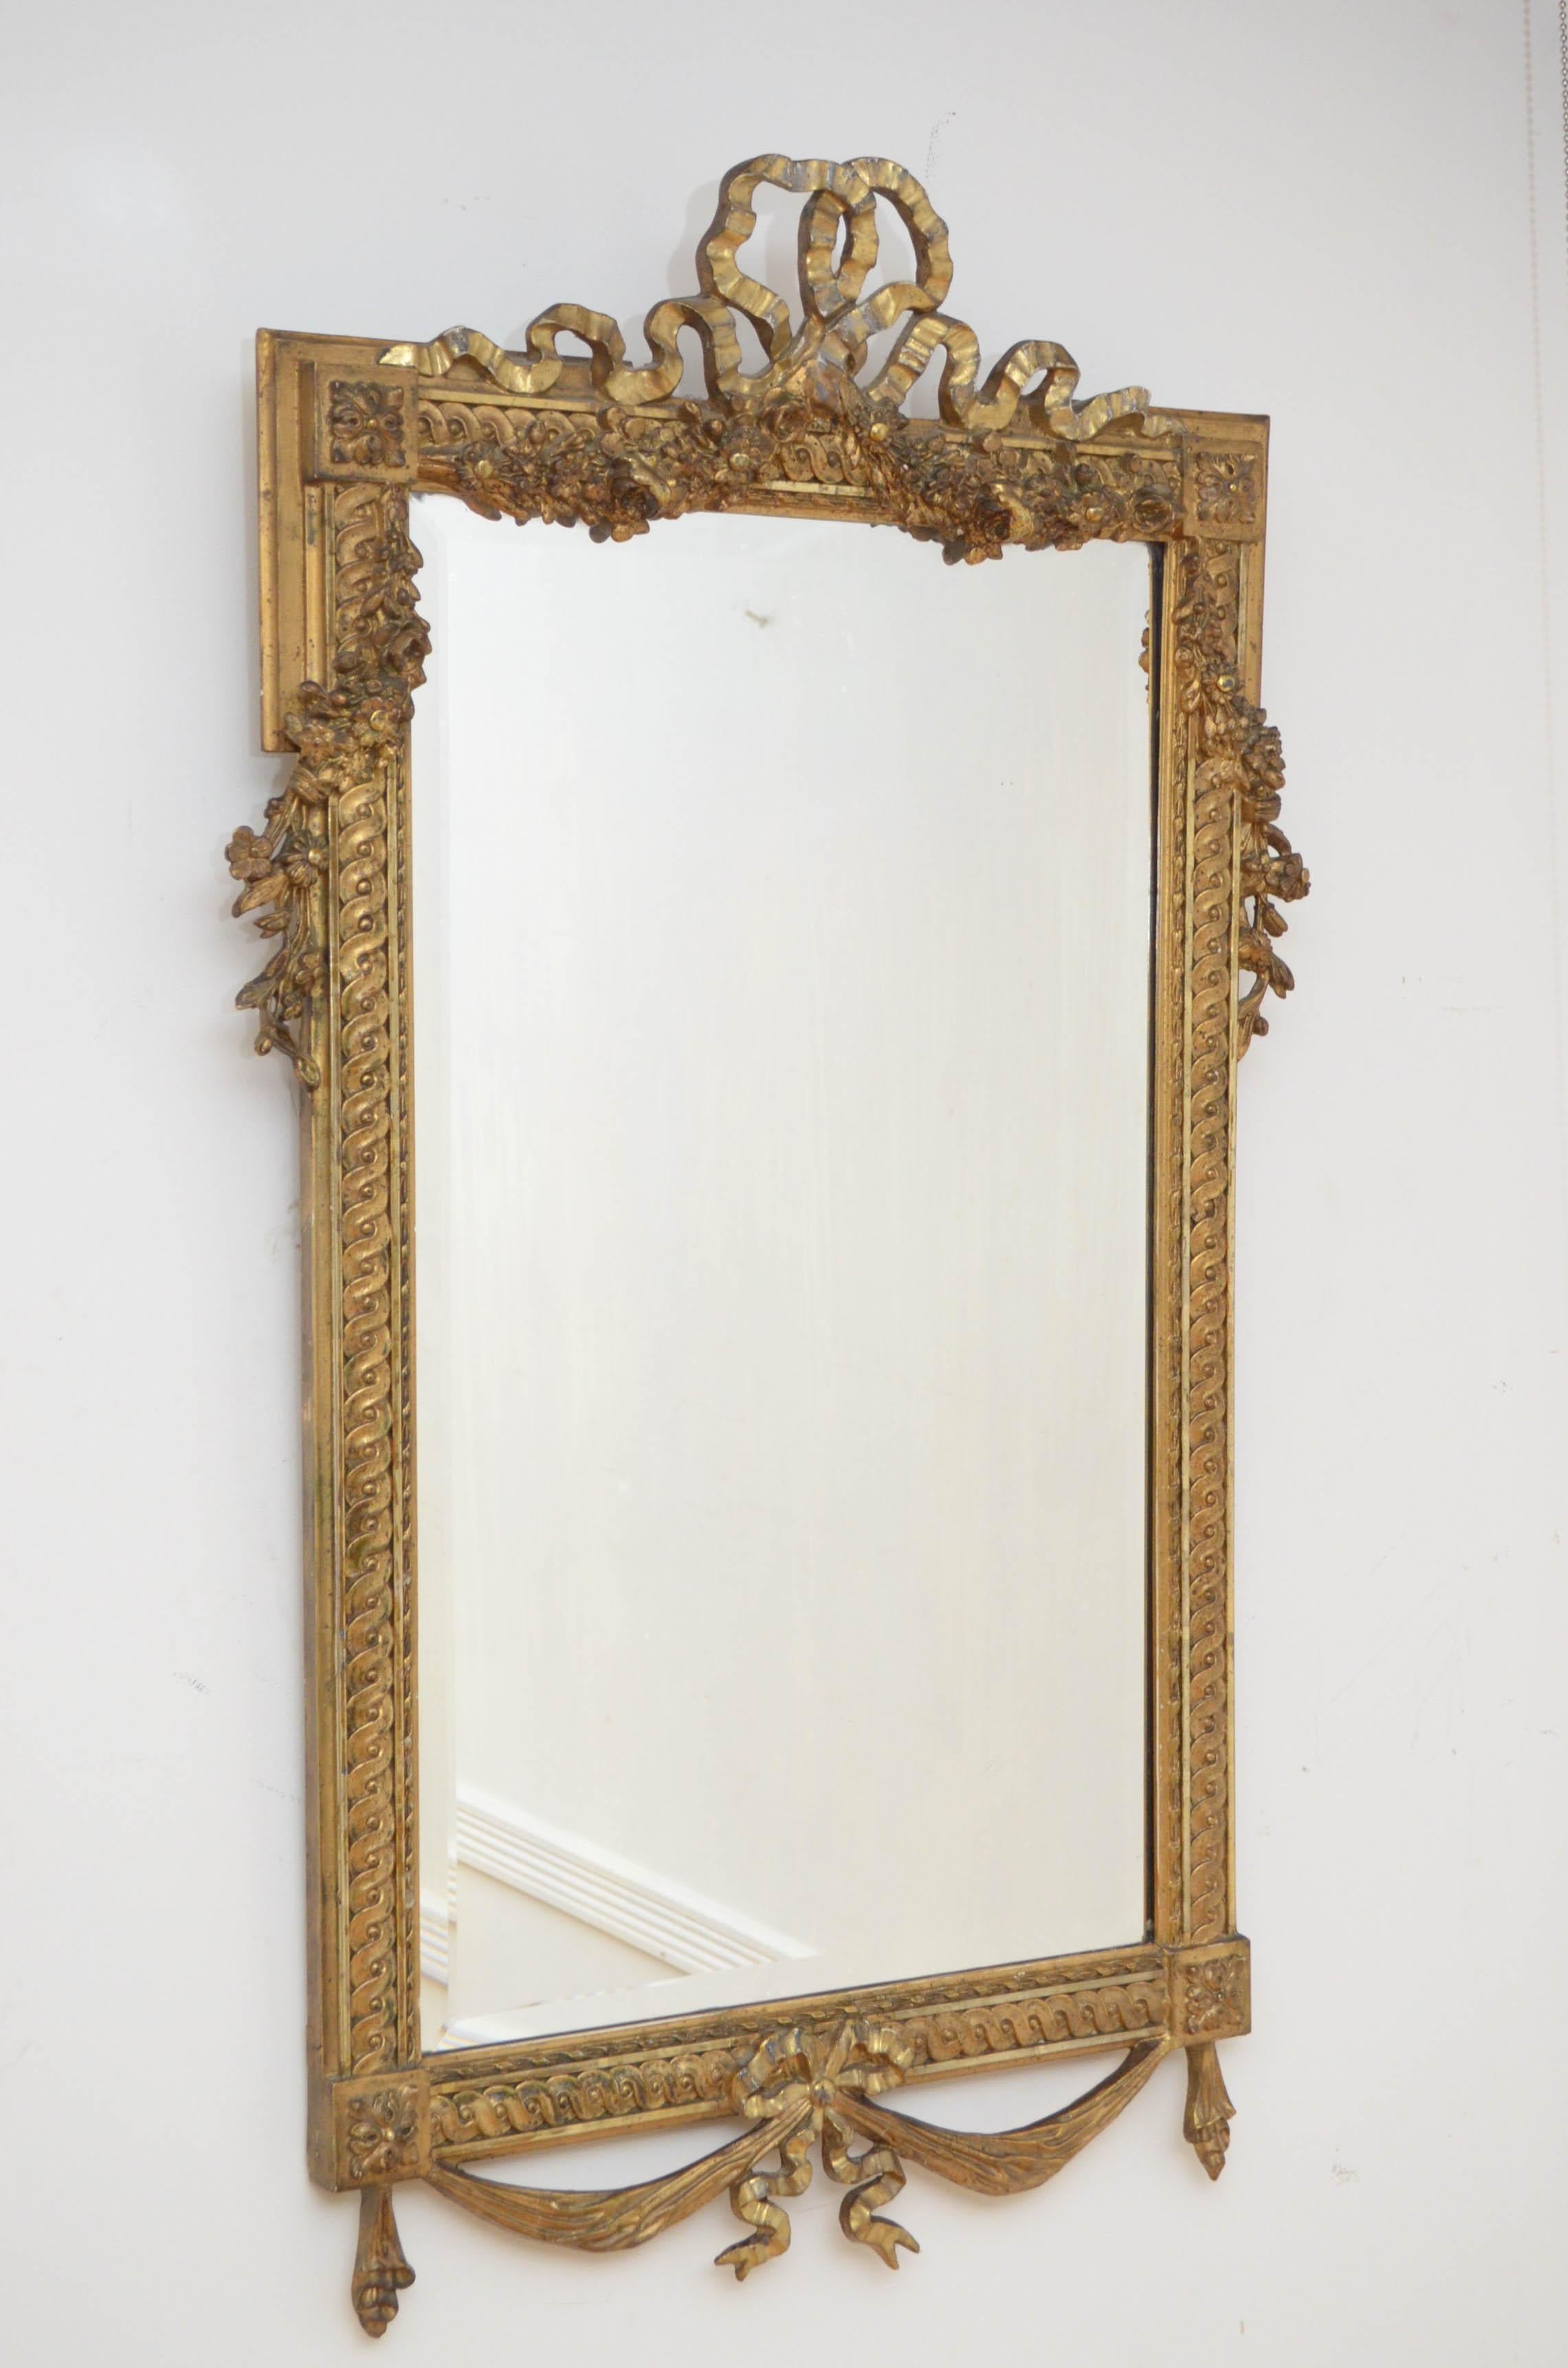 K0160 Elaborate early XXth century giltwood wall mirror, having original bevelled edge glass with some imperceptions in beautifully carved frame with swags to the base and bow crest to the top flanked by extensive floral decoration. This antique